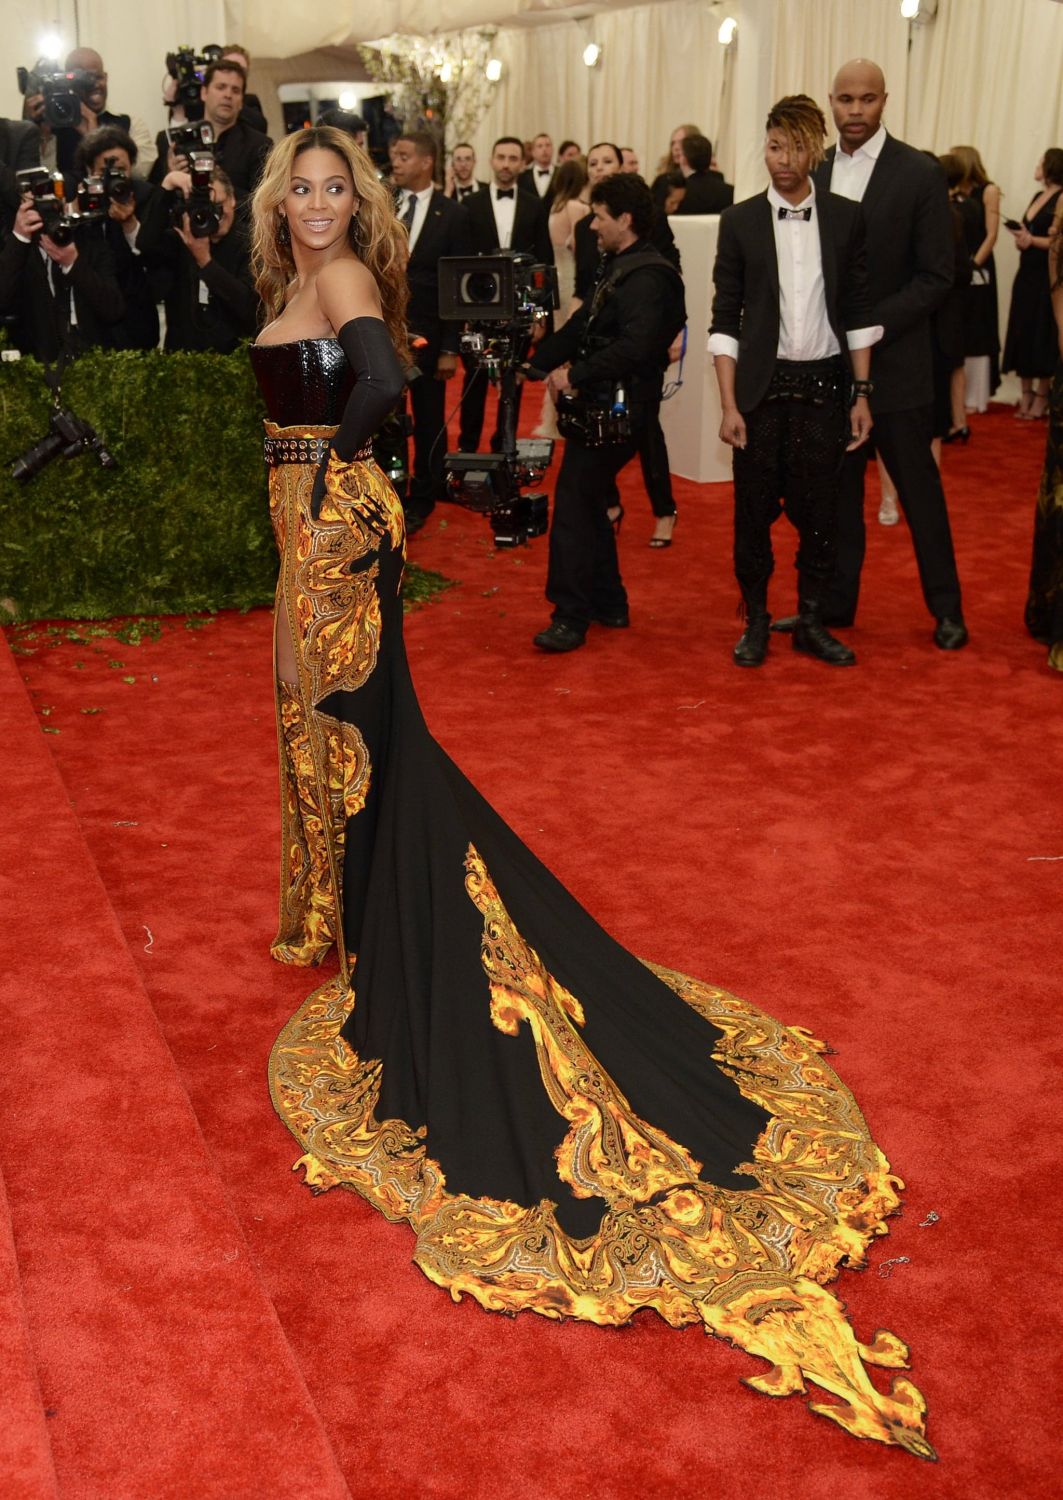 Beyoncé-had-crowd-transfixed-her-arrival-her-Givenchy